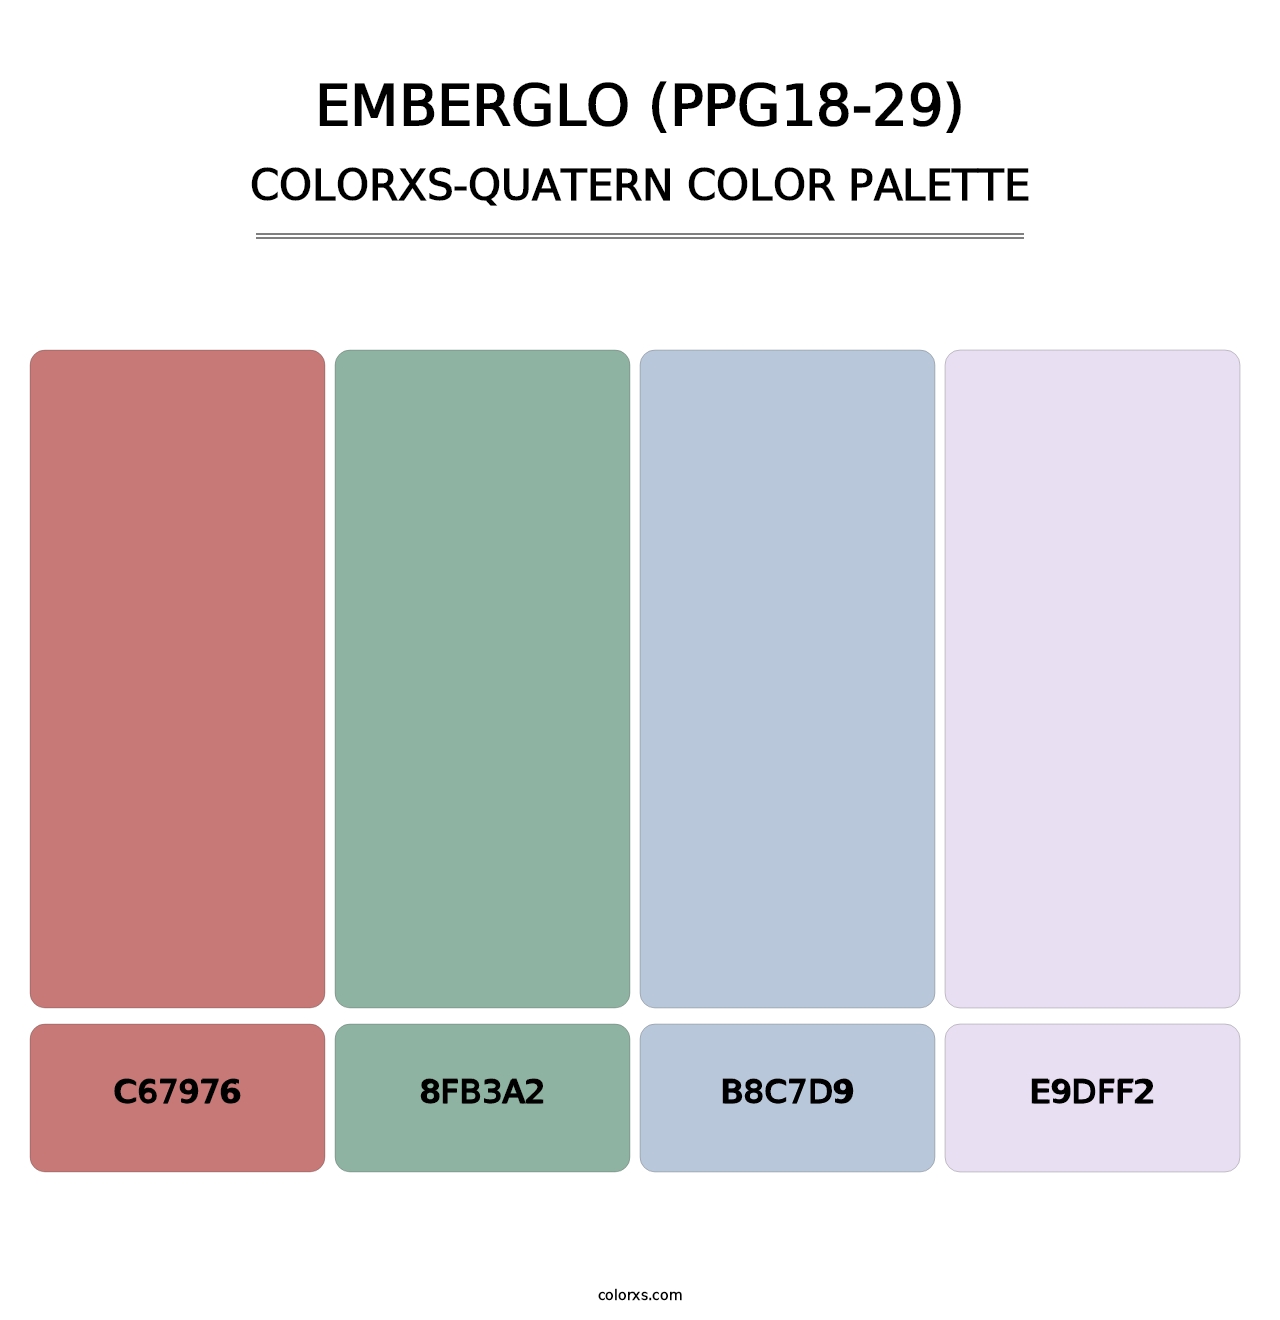 Emberglo (PPG18-29) - Colorxs Quatern Palette